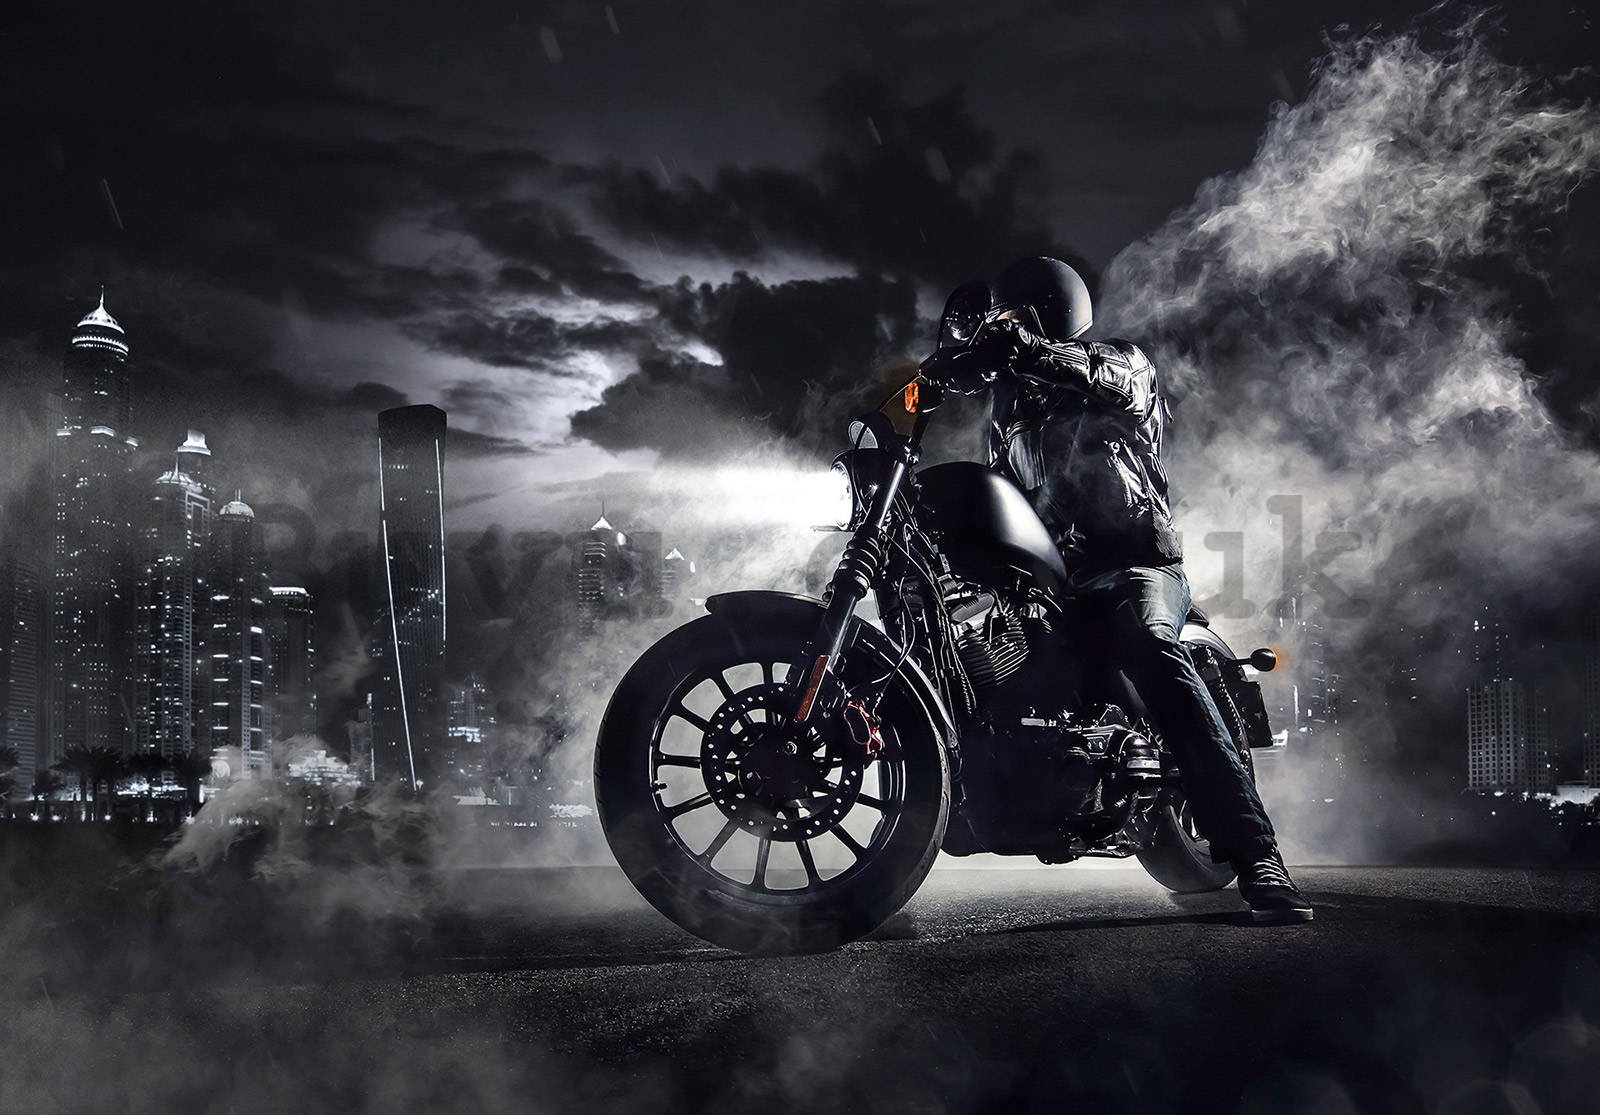 Wall mural vlies: Motorcyclist in the night city - 254x184 cm